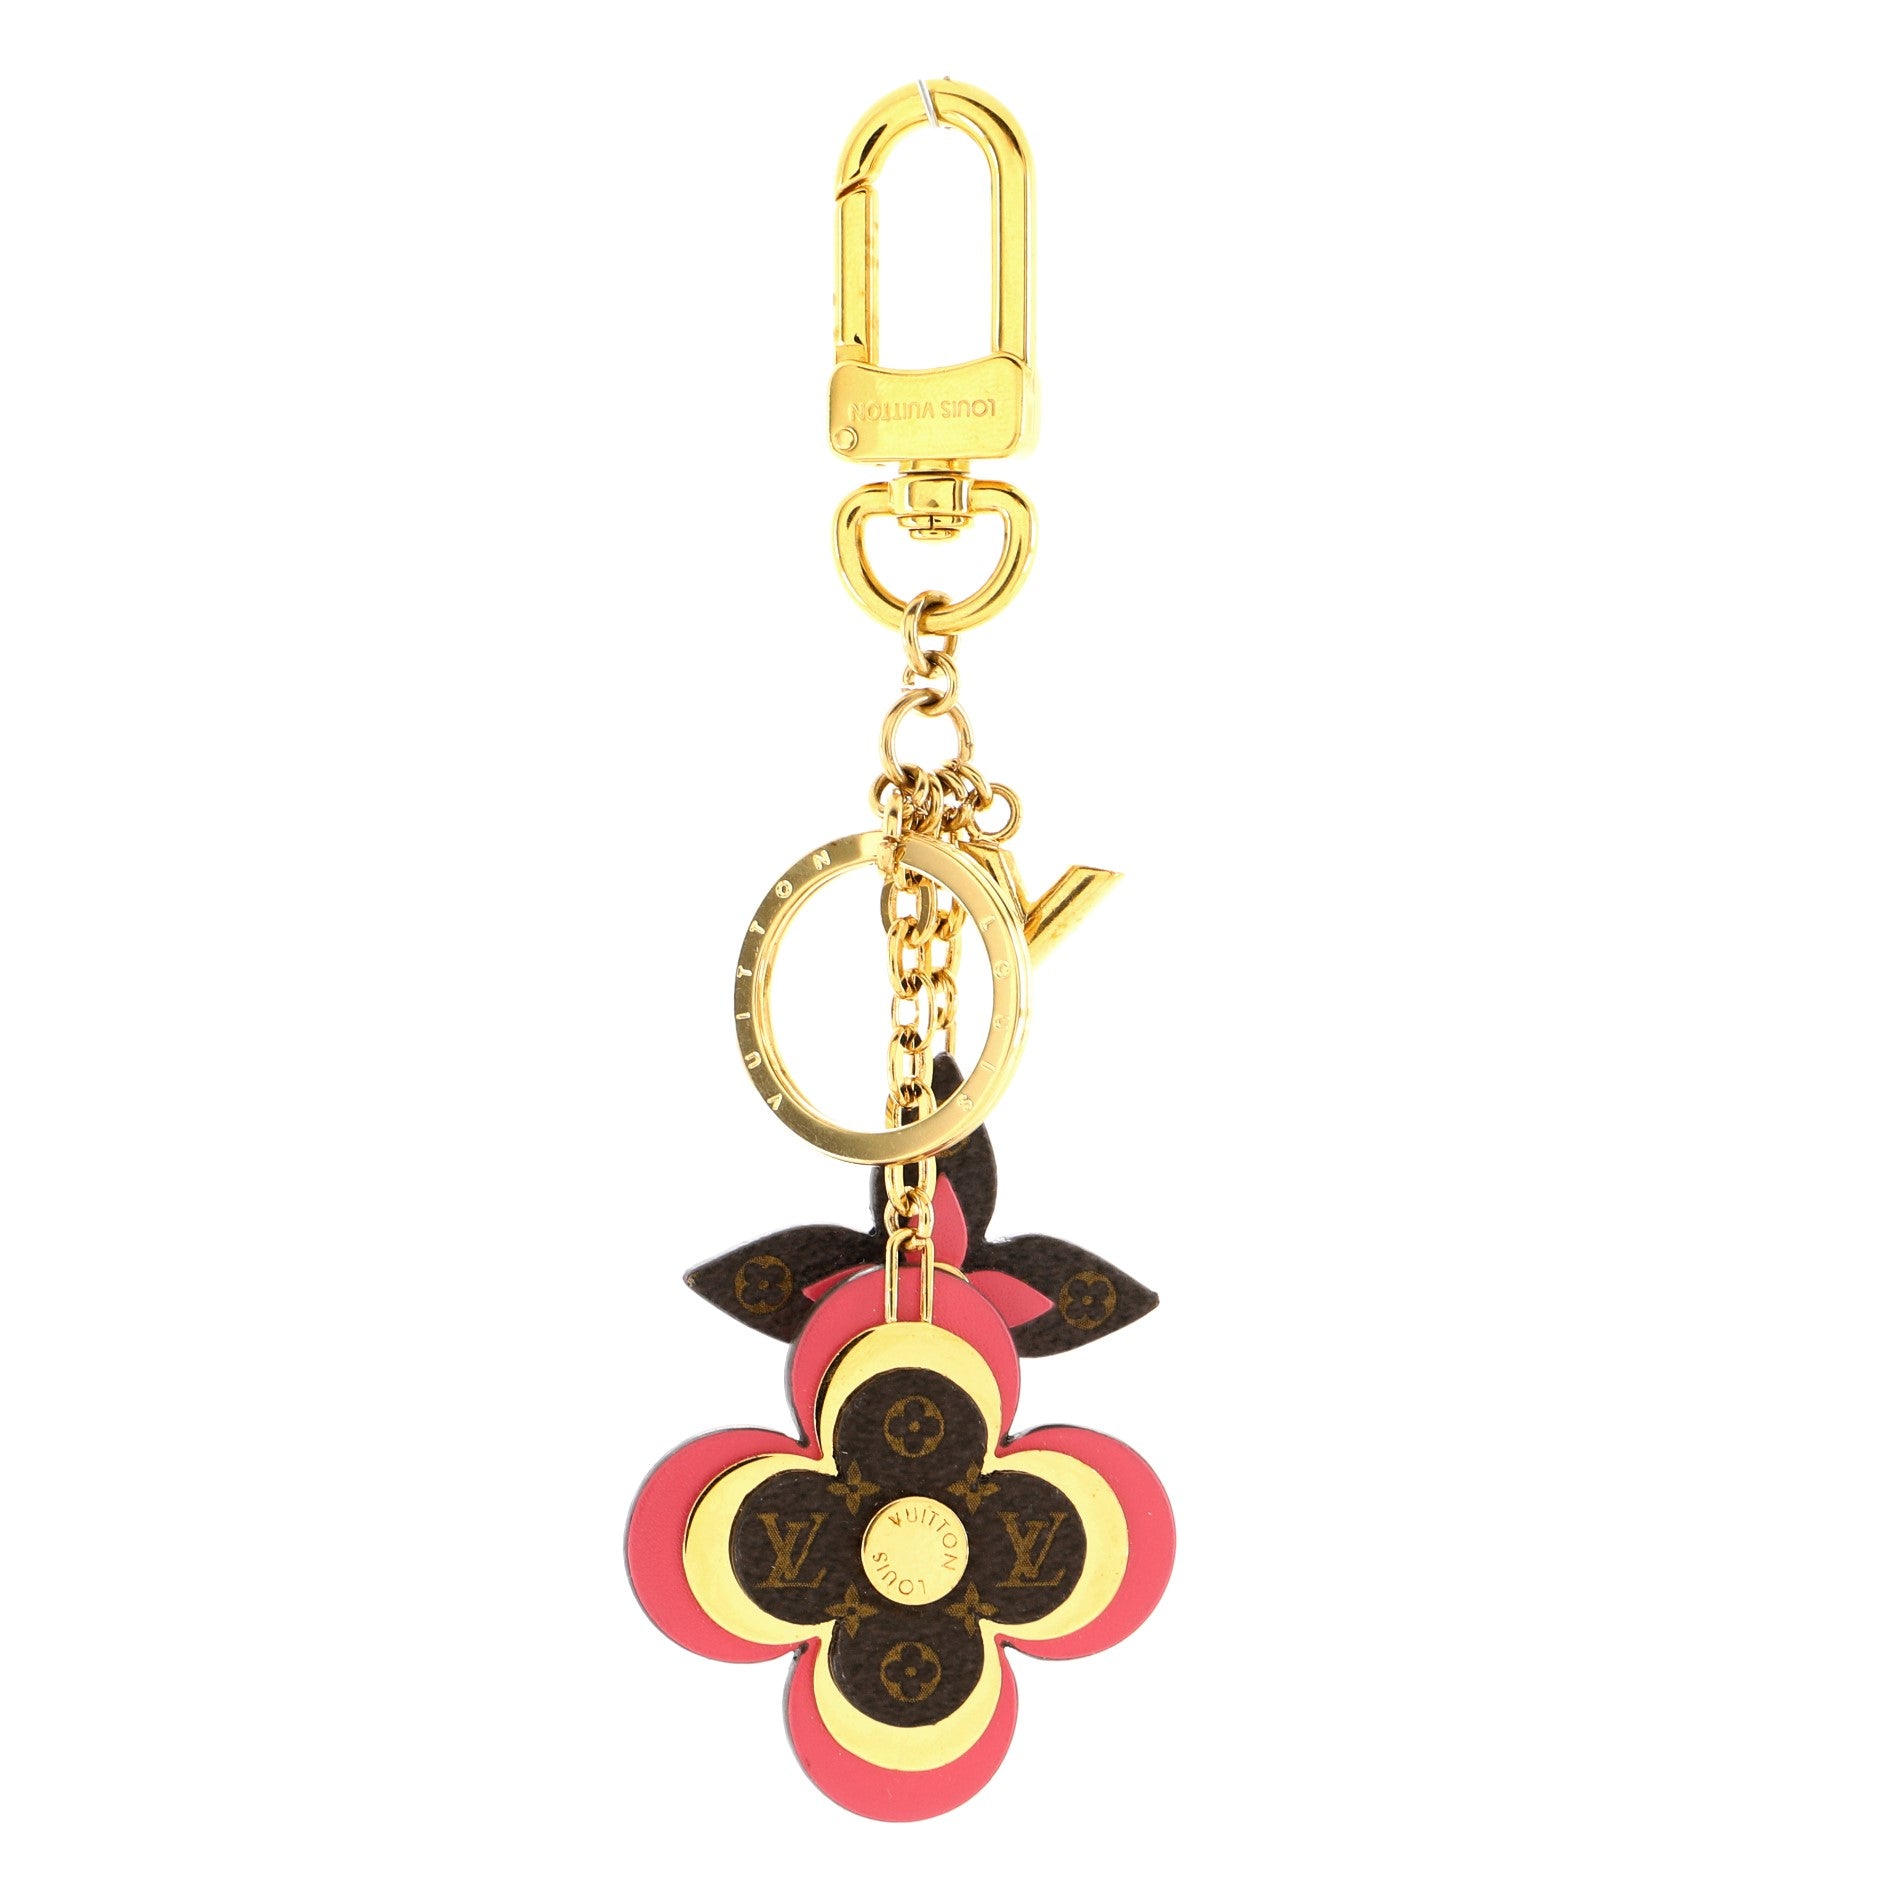 Idylle blossom bag charm Louis Vuitton Gold in gold and steel